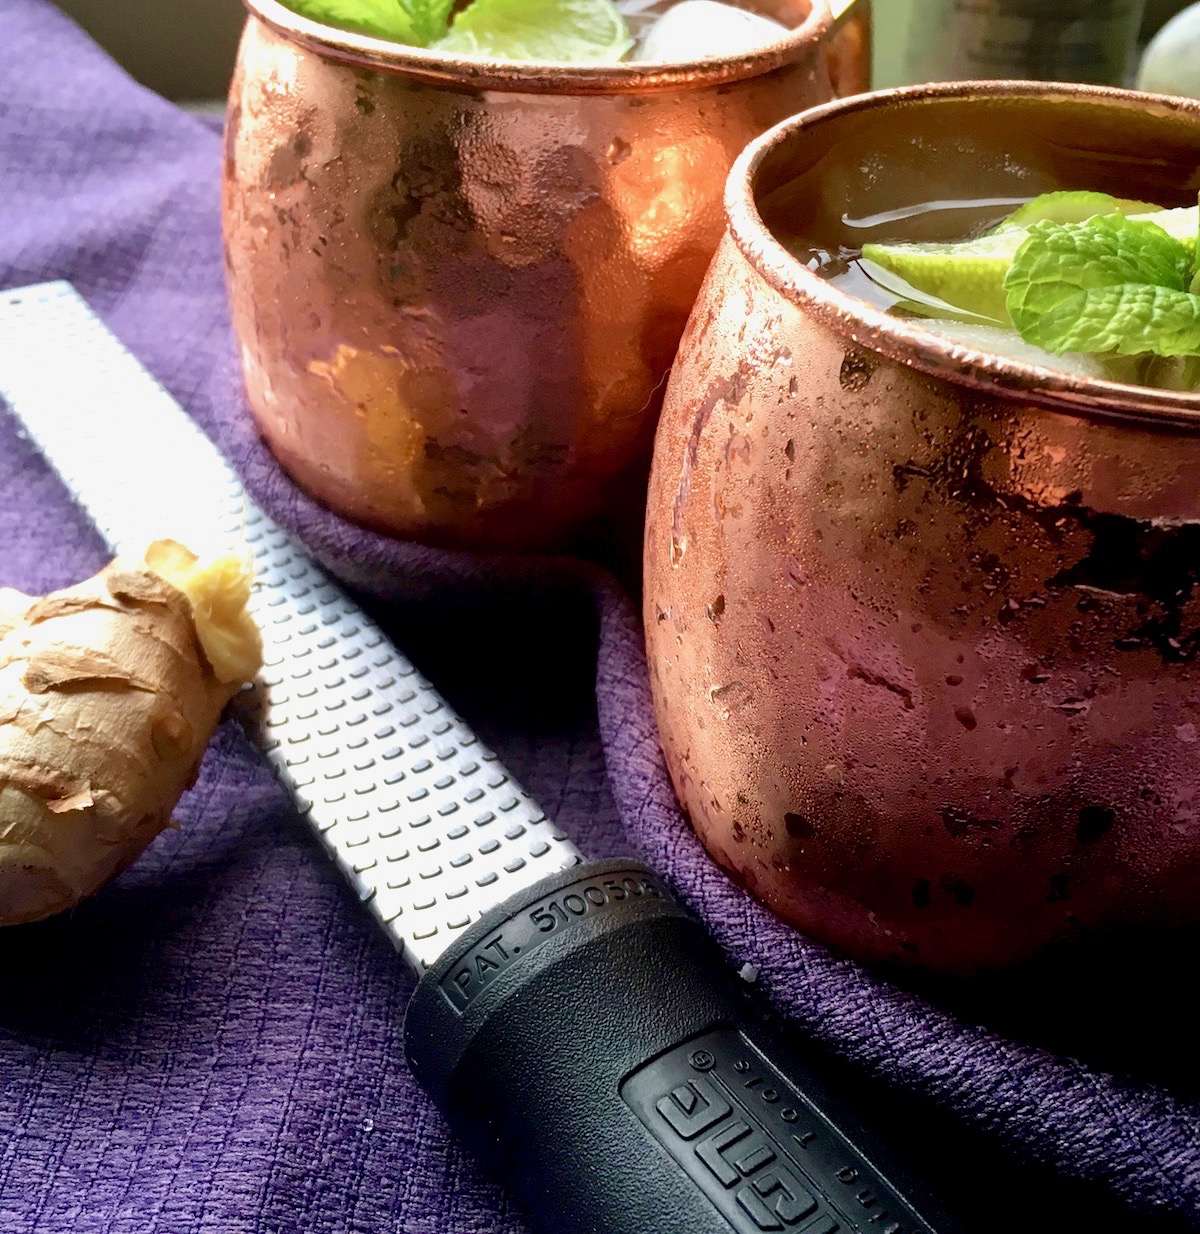 Although Moscow Mules are meant to be enjoyed ice cold, there is something inherently comforting about the warm, spicy notes of ginger found in this classic cocktail.